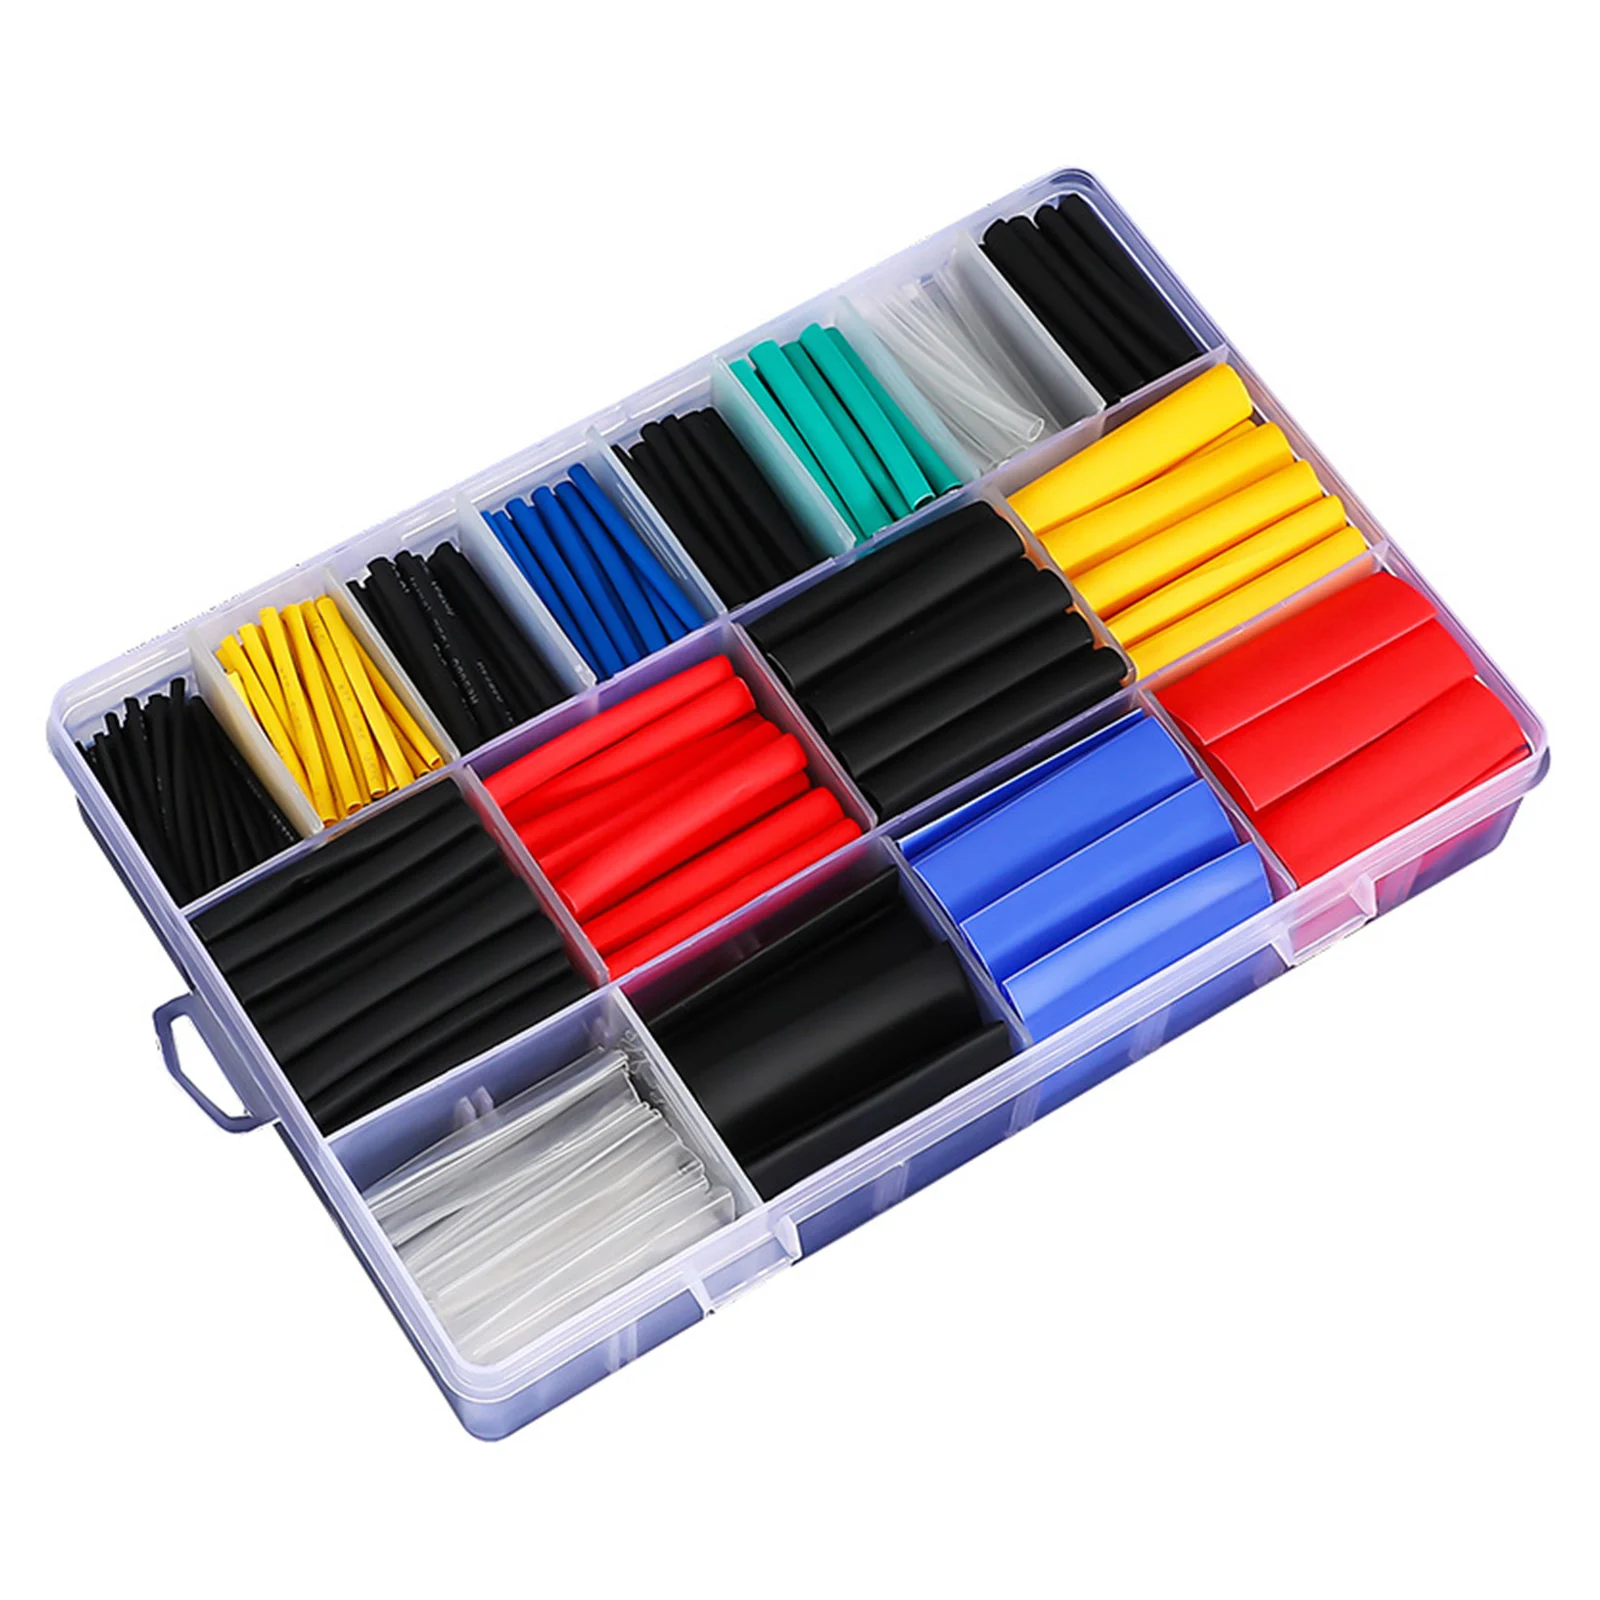 

580pcs Heat Shrink Tubes Tubing Insulation Shrinkable Sleeve Assortment Electronic Polyolefin Wire Cable Sleeve Kit 6 Colors